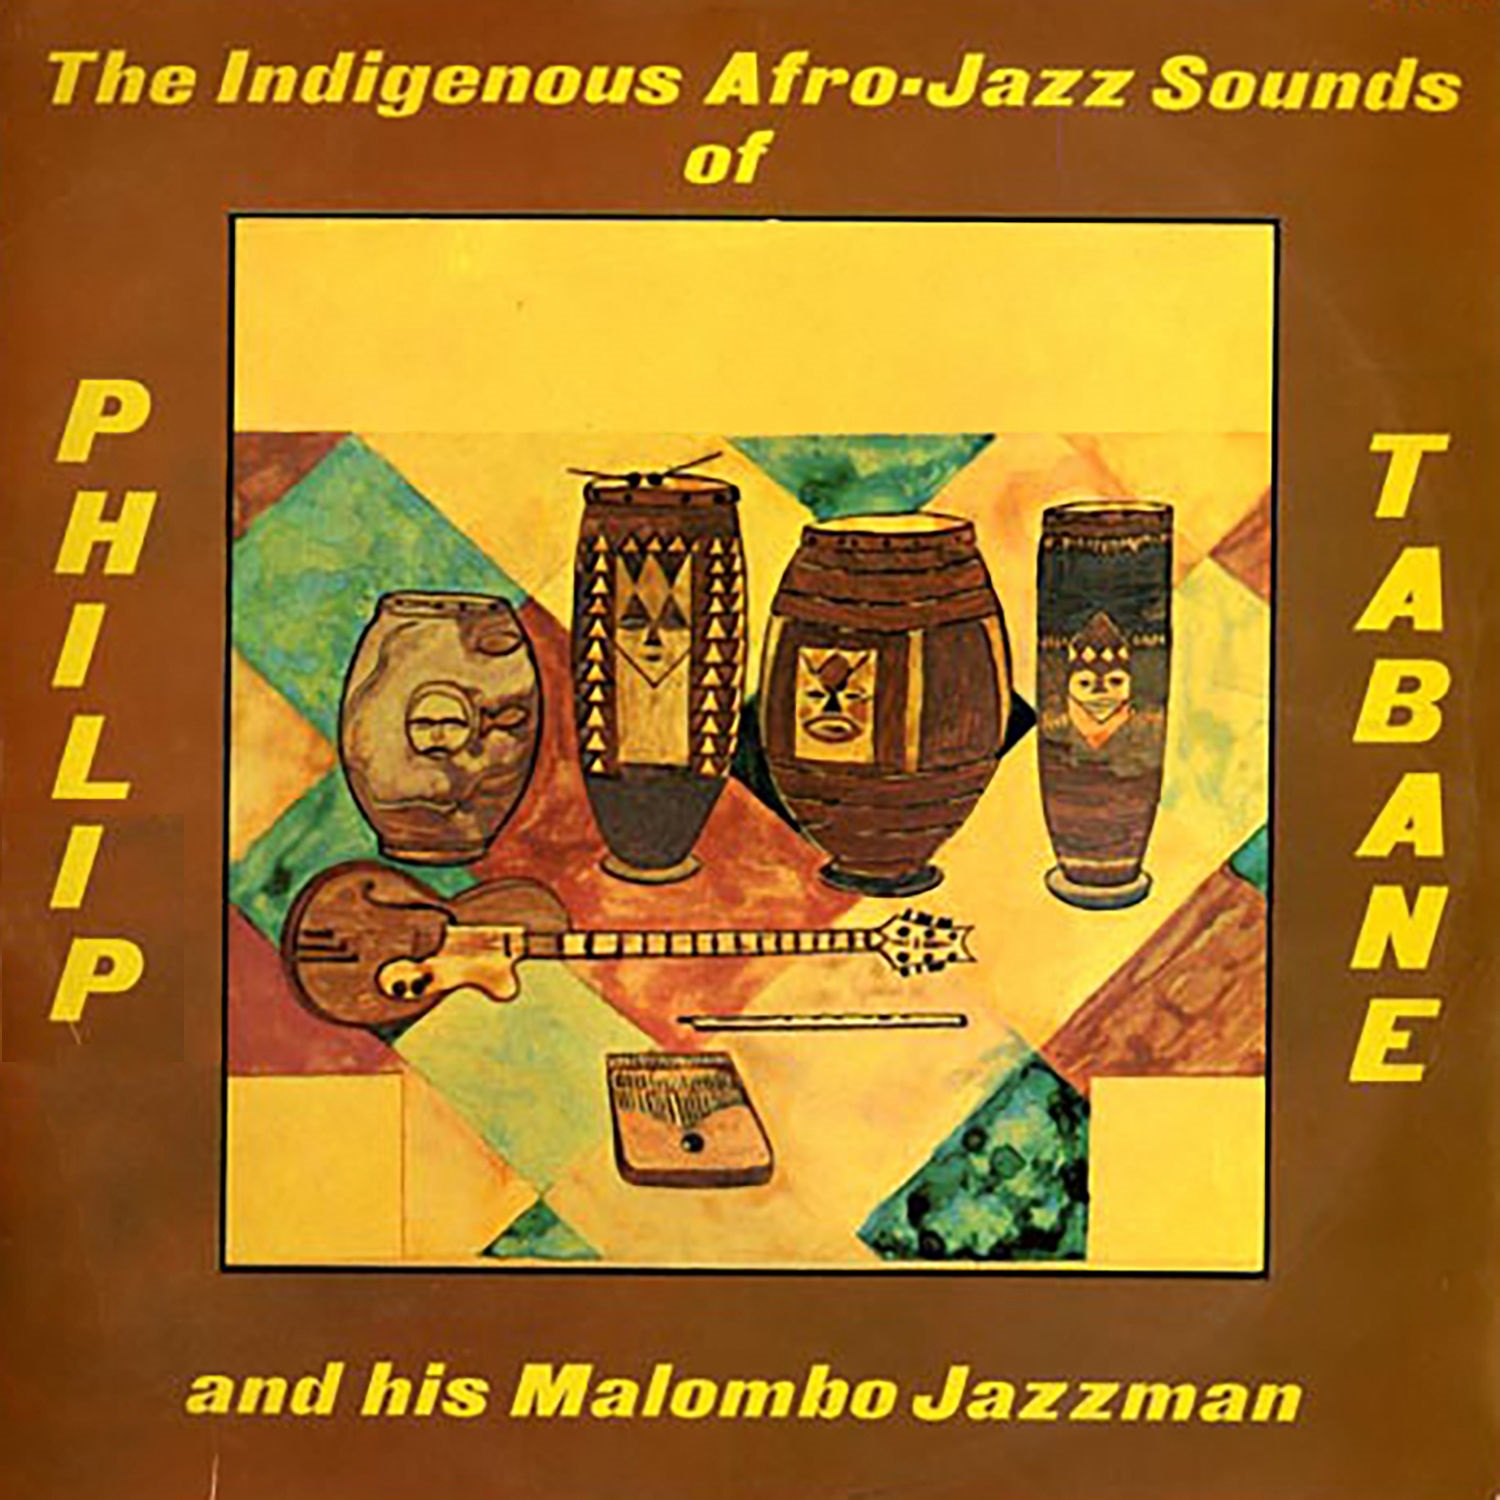 Phillip Tabane And His Malombo Jazzman – The Indigenous Afro-Jazz Sounds (1969/2020) [FLAC 24bit/44,1kHz]